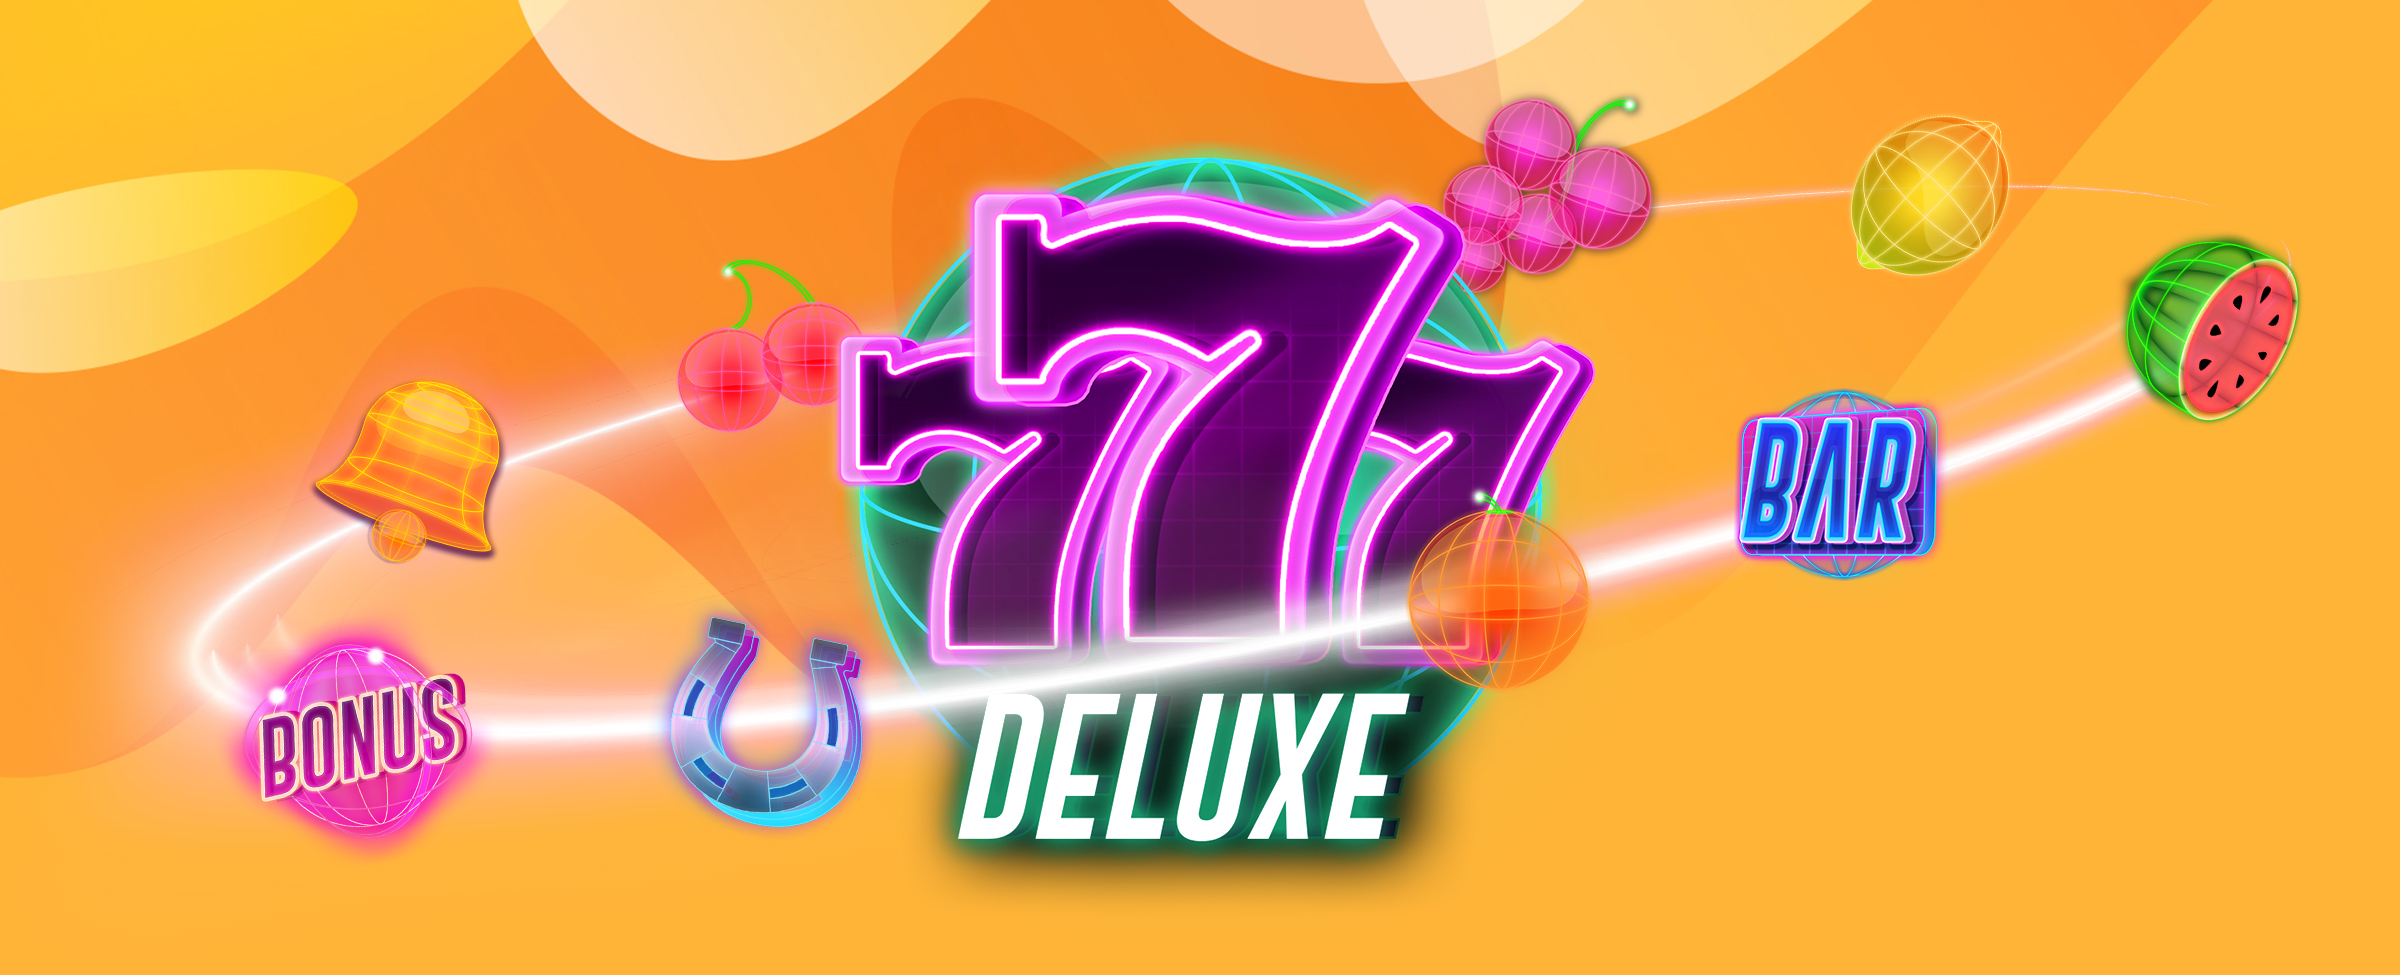 There's no denying that 777 Deluxe remains one of our most popular games at Slots.lv. Are you ready to test the waters?